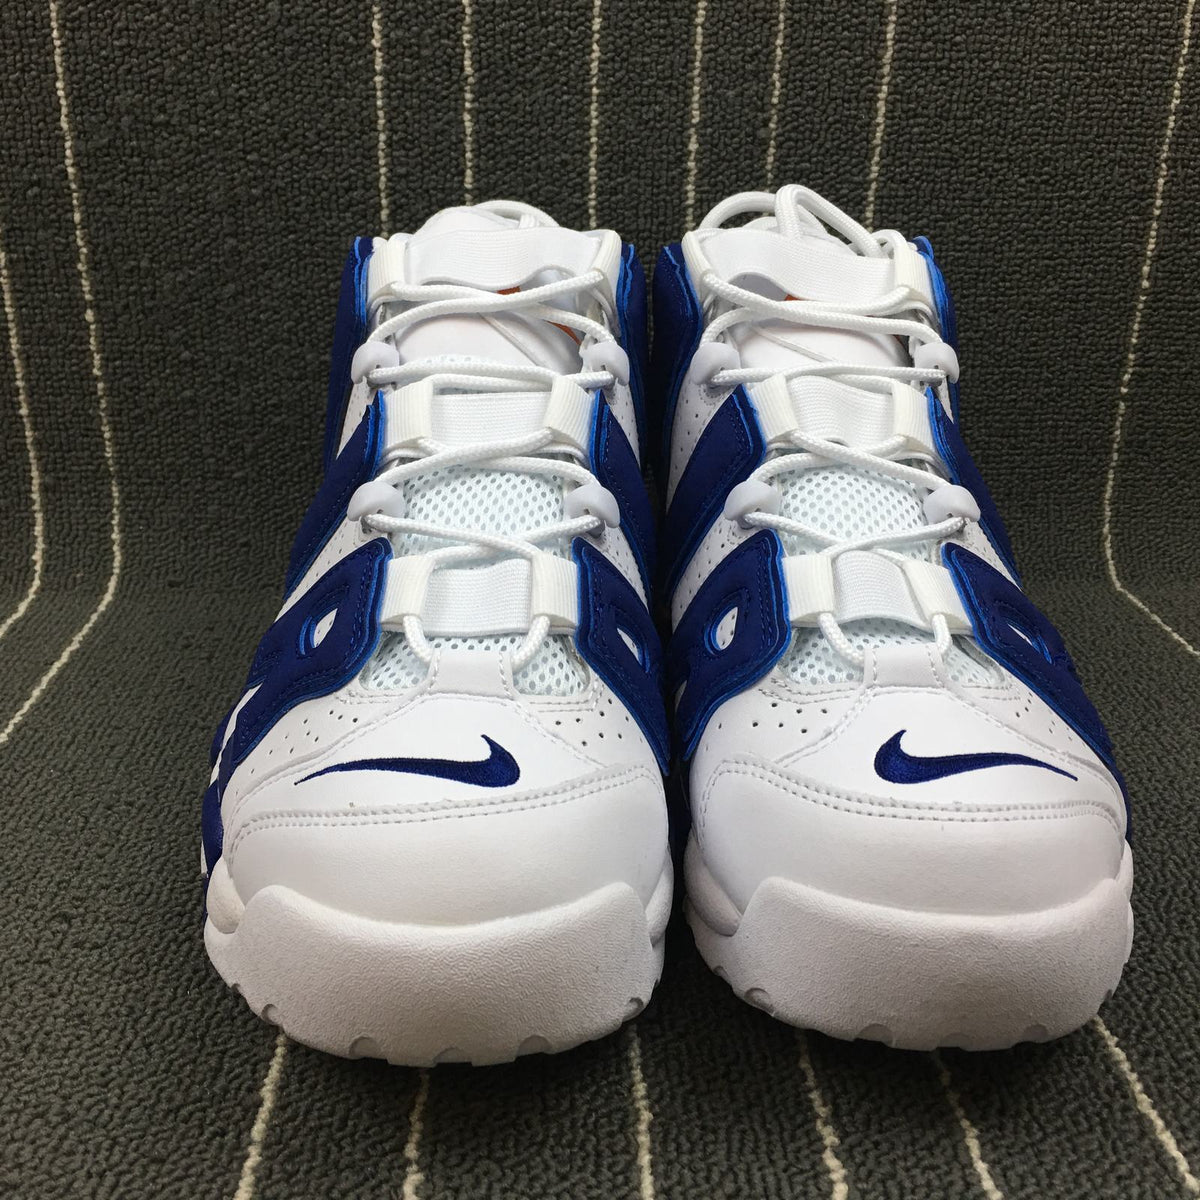 nike tiempo 2015 rose gold ring band - 101 – - Air More Uptempo 96 White Deep Royal Blue 921948 - shop